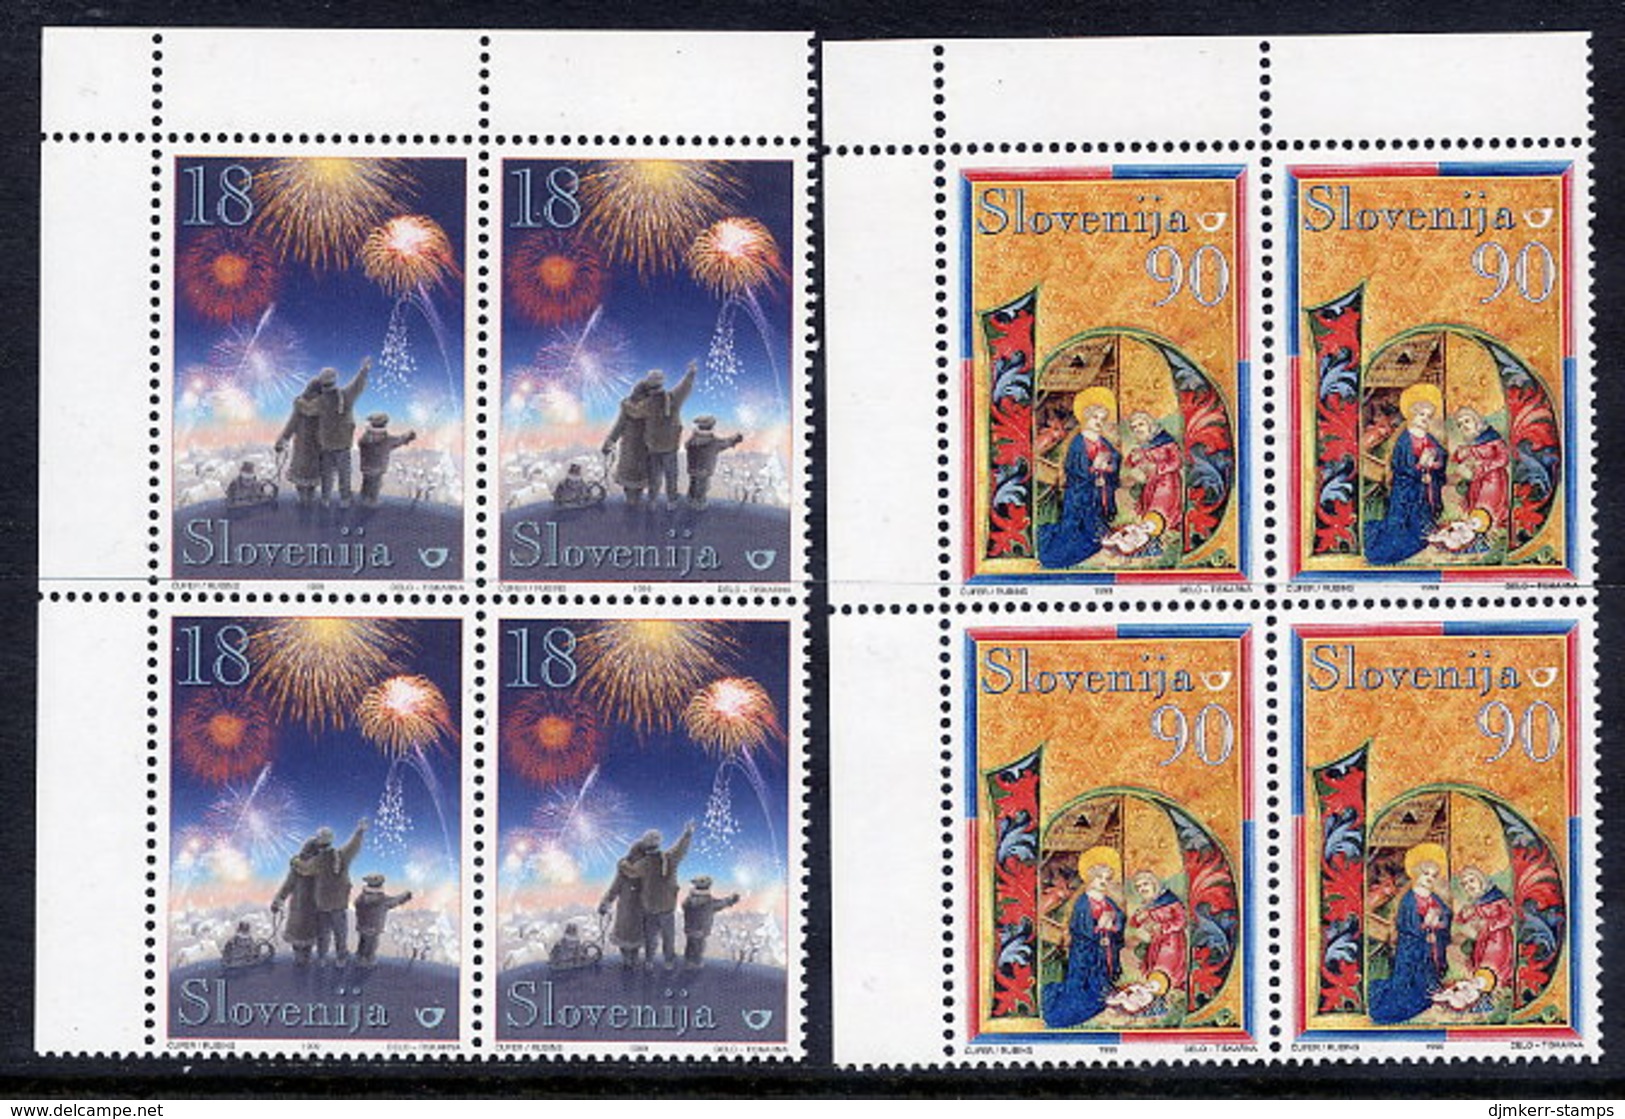 SLOVENIA 1999 Christmas 18 T. And 90 T. From Sheets Blocks Of 4 MNH / **.  Michel 277, 279 - Slovenia